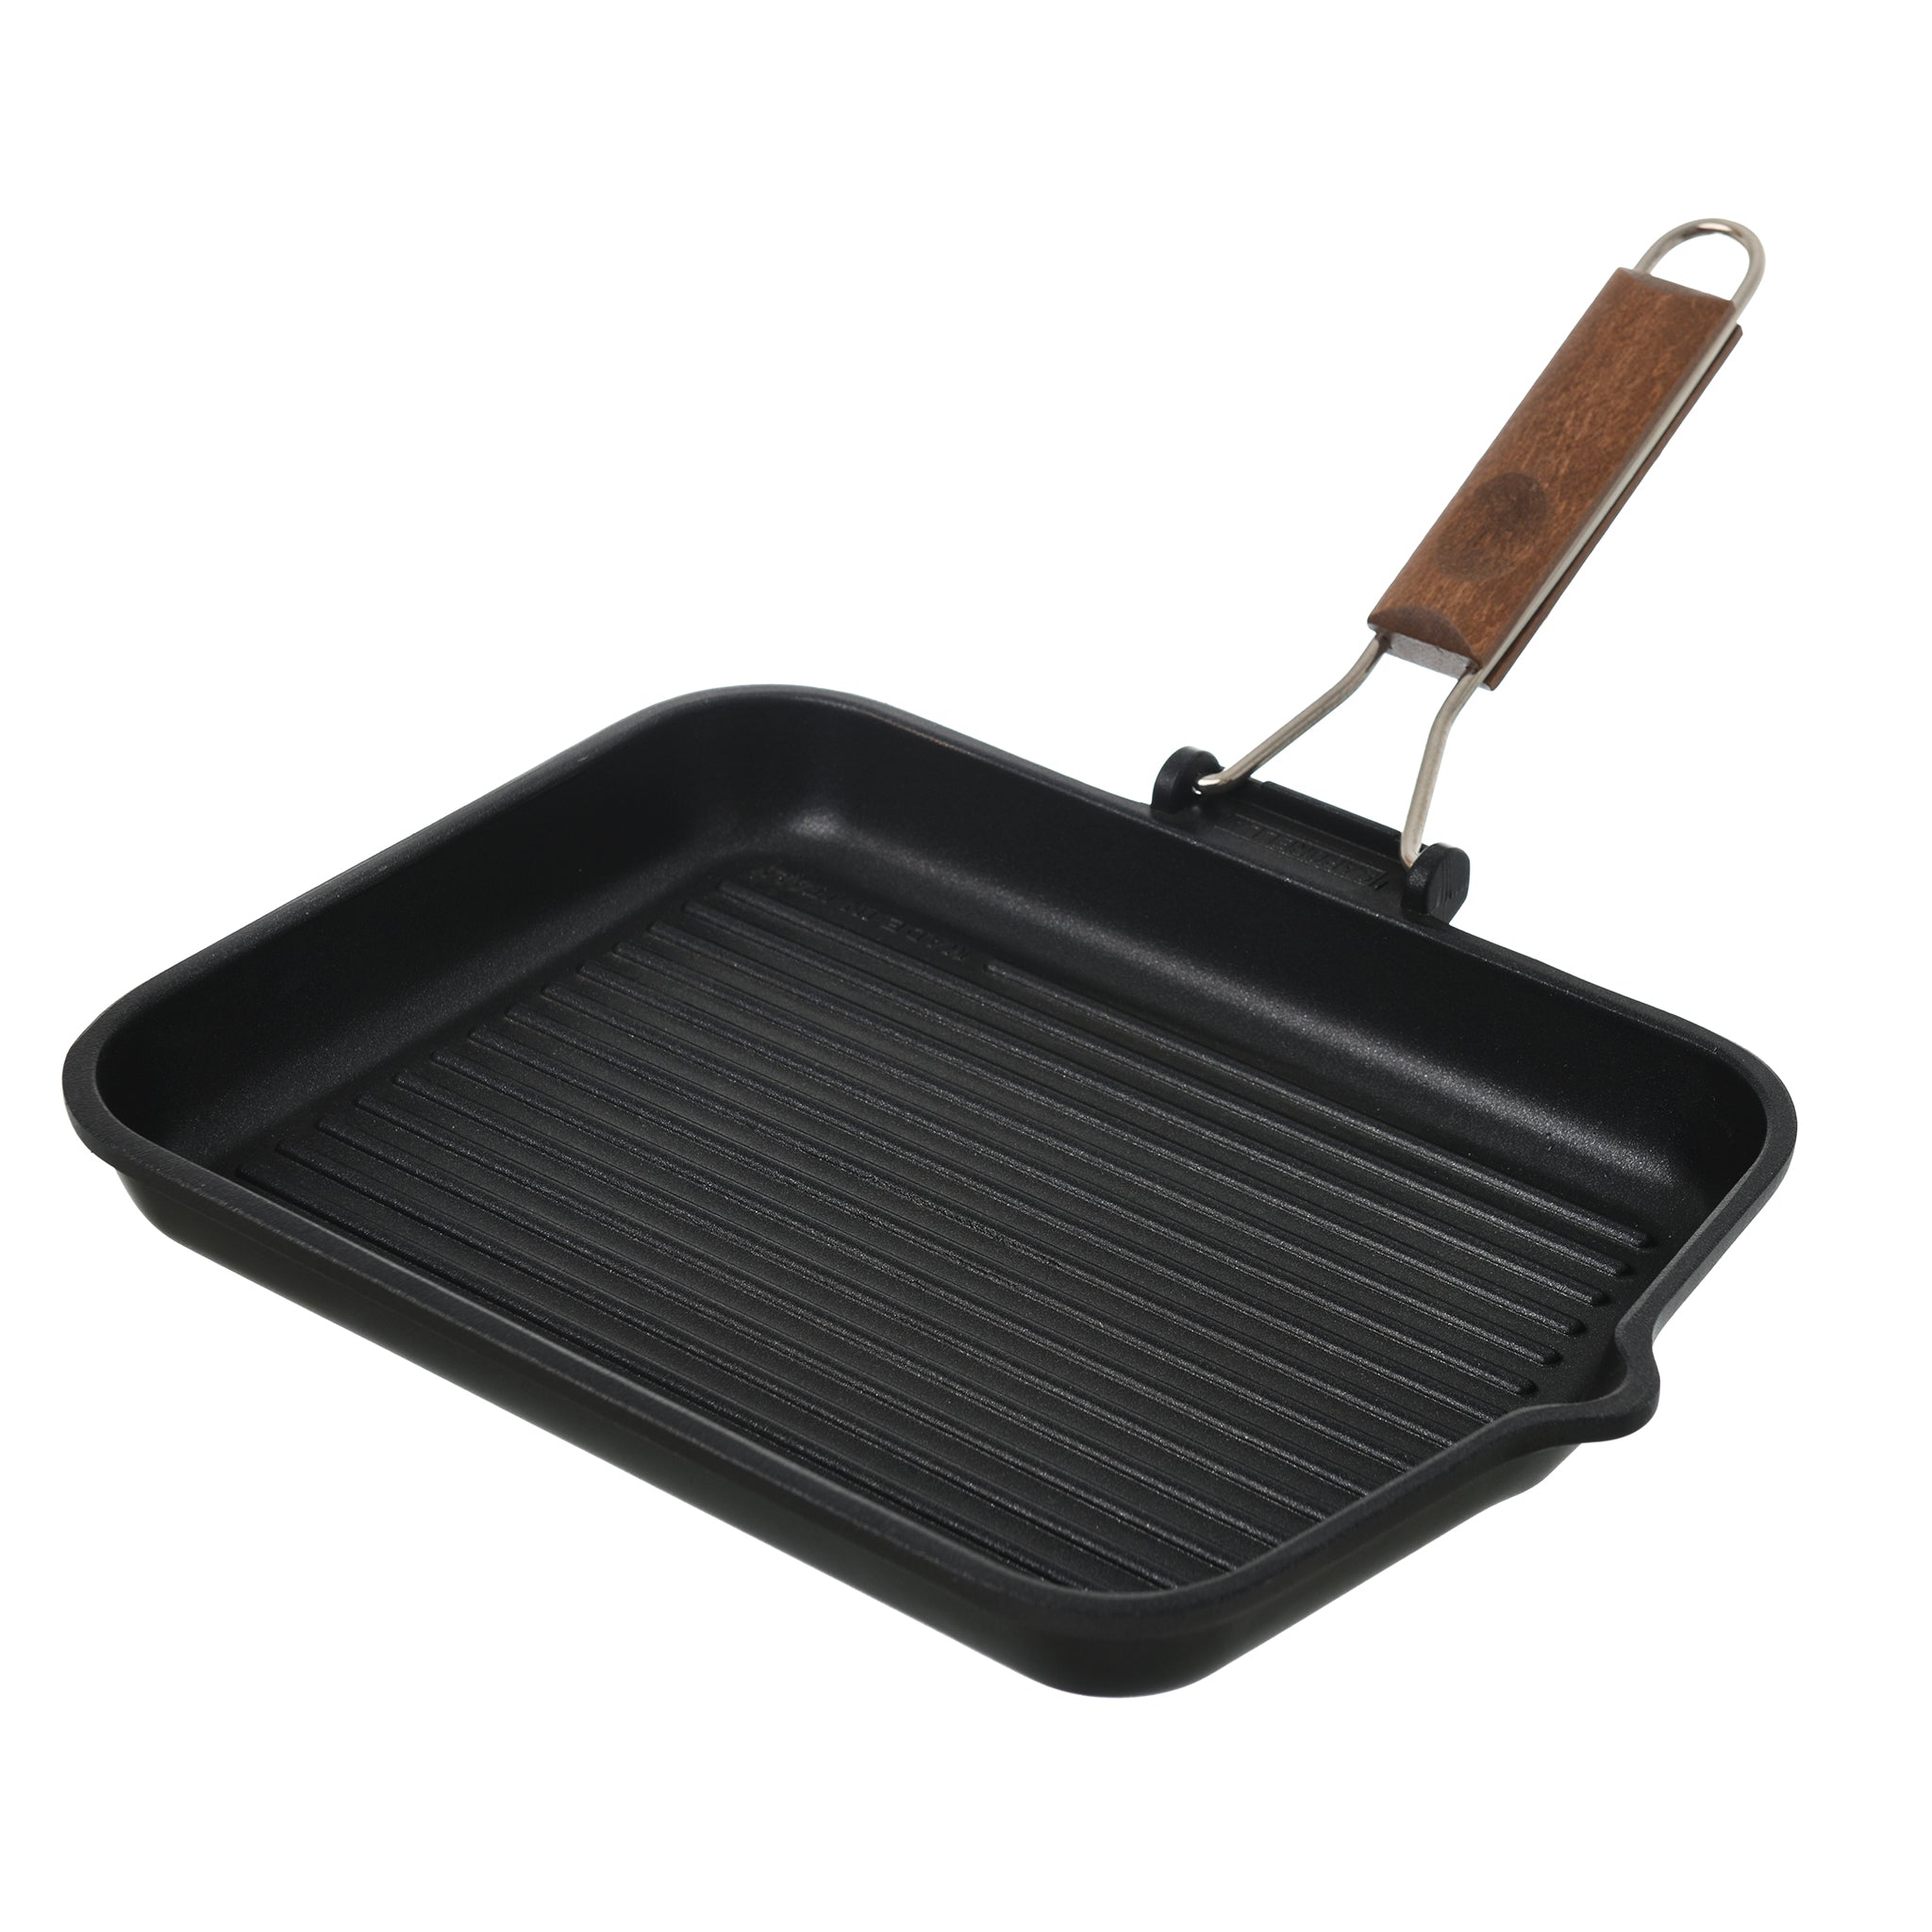 Risoli - Grill With Wood Folding Handle - 36cm - 44000415